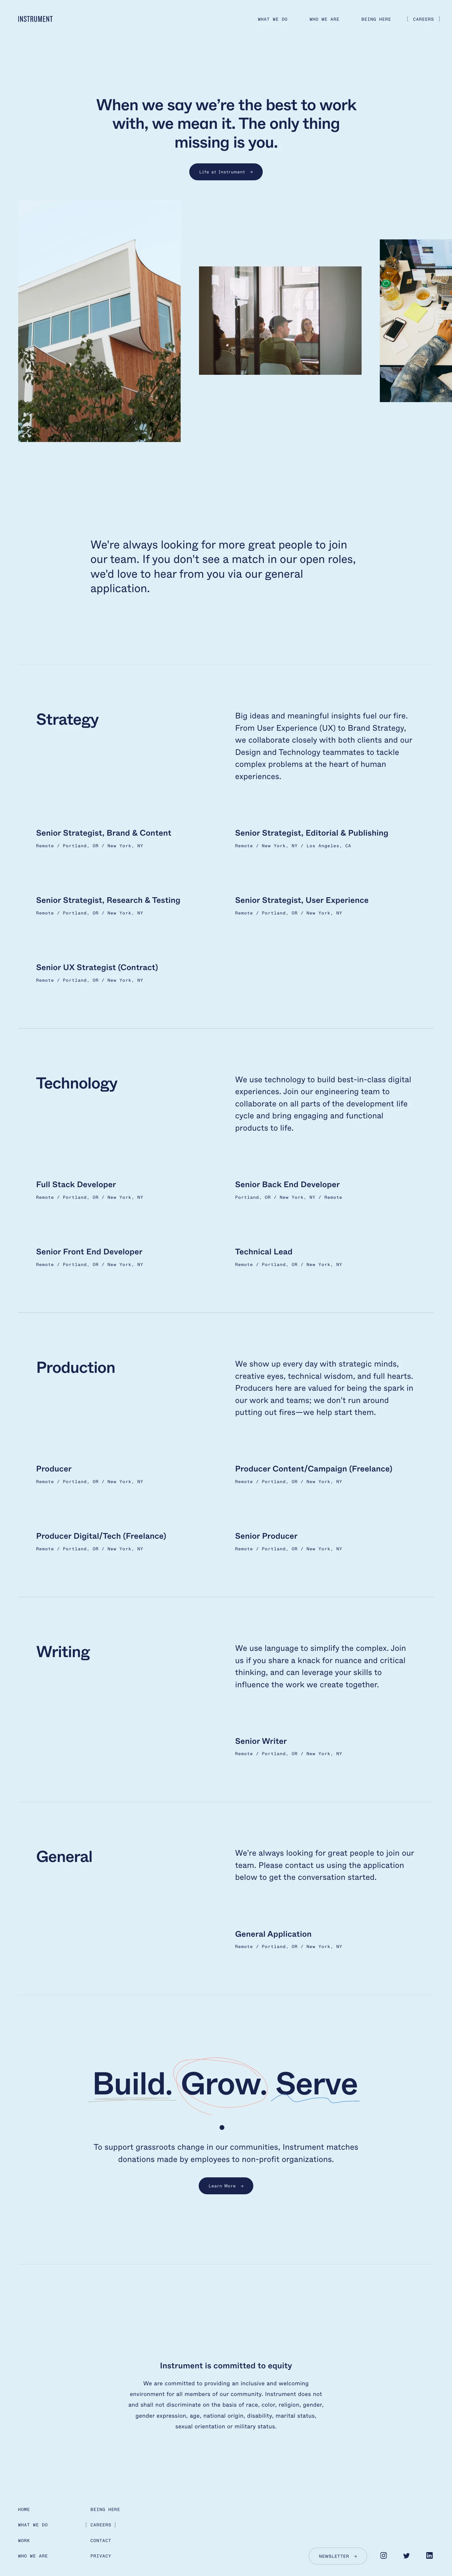 Instrument Landing Page Example: We are equal parts creative agency, engineering firm, and consultancy. Our approach draws the best elements of each to deliver exceptional work.